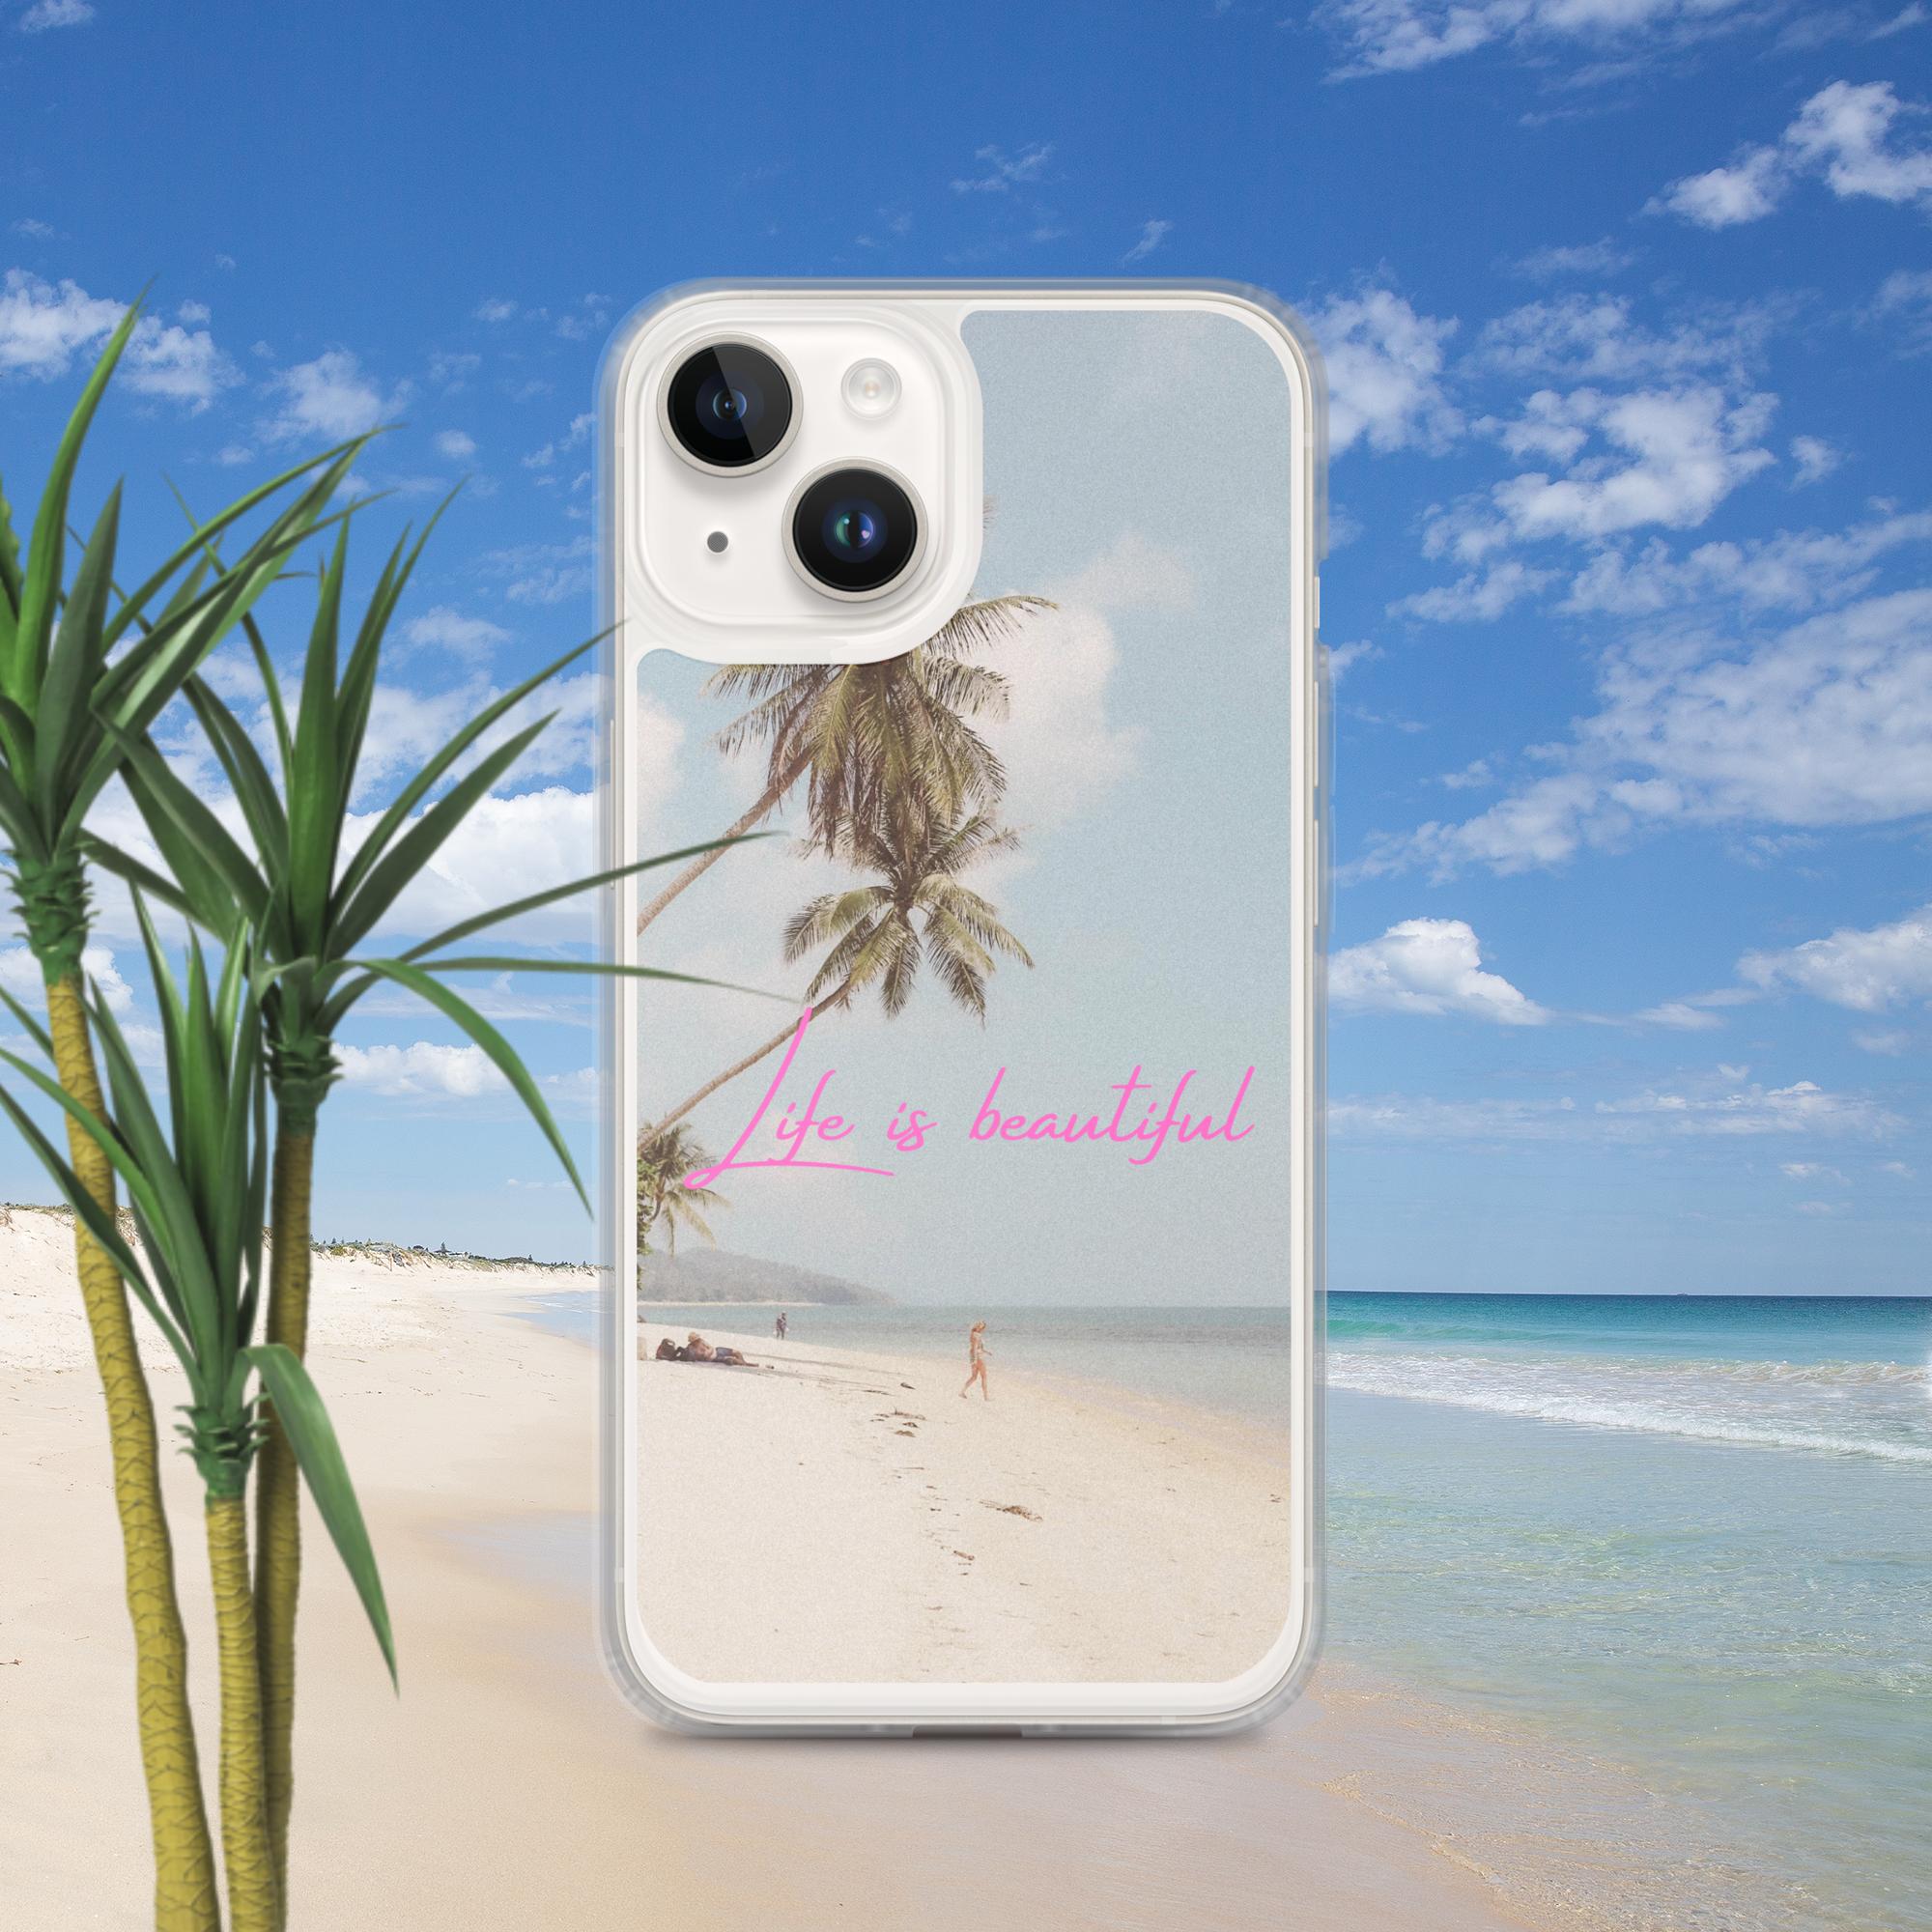 Life is Beautiful on the Beach - Iphone Case